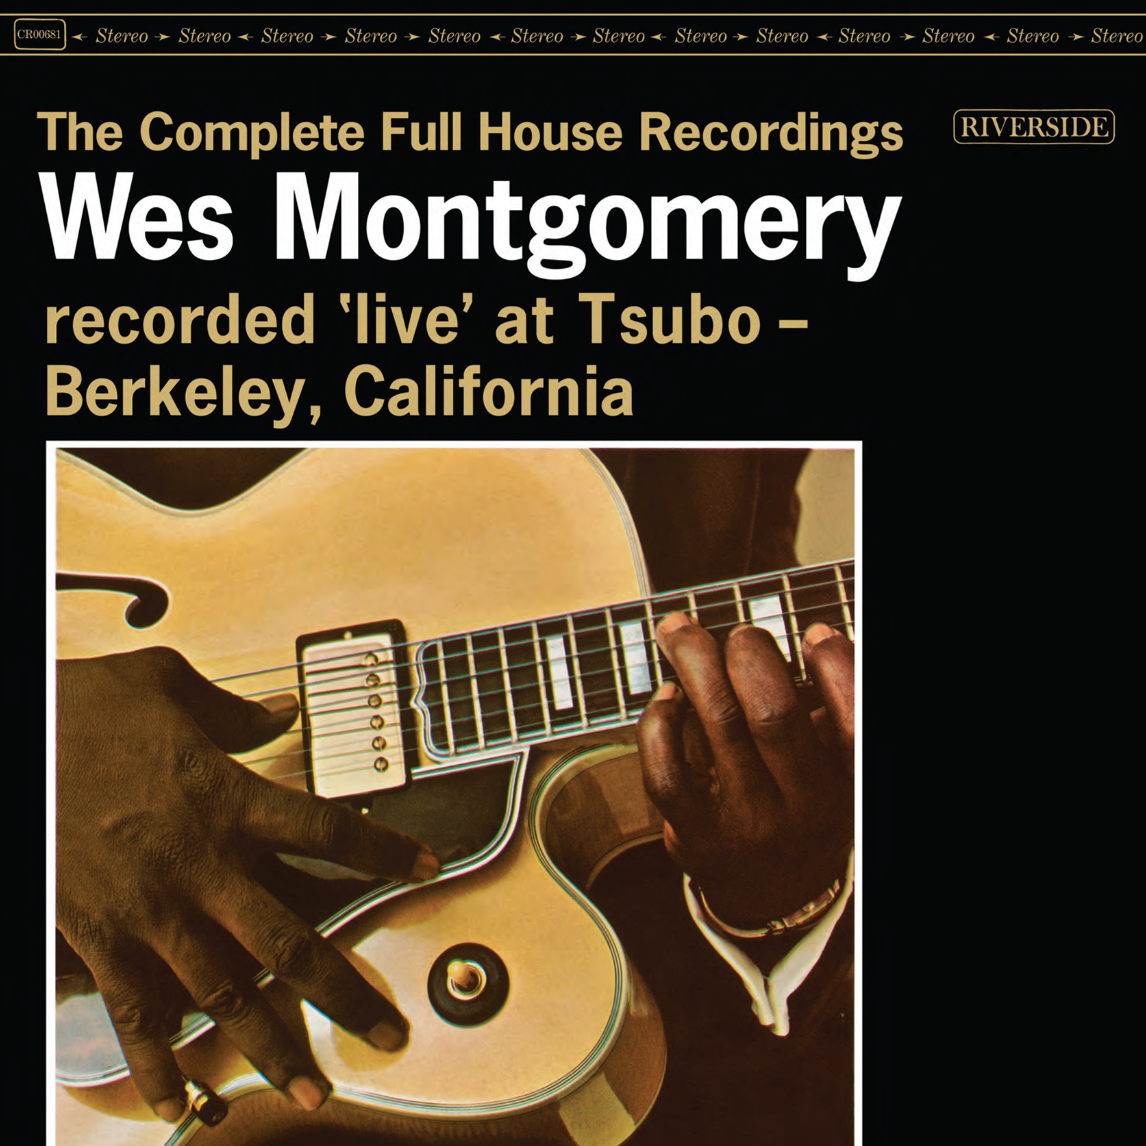 HONORING WES MONTGOMERY'S CENTENNIAL AND RIVERSIDE RECORDS’ 70TH ANNIVERSARY WITH THE COMPLETE FULL HOUSE RECORDINGS